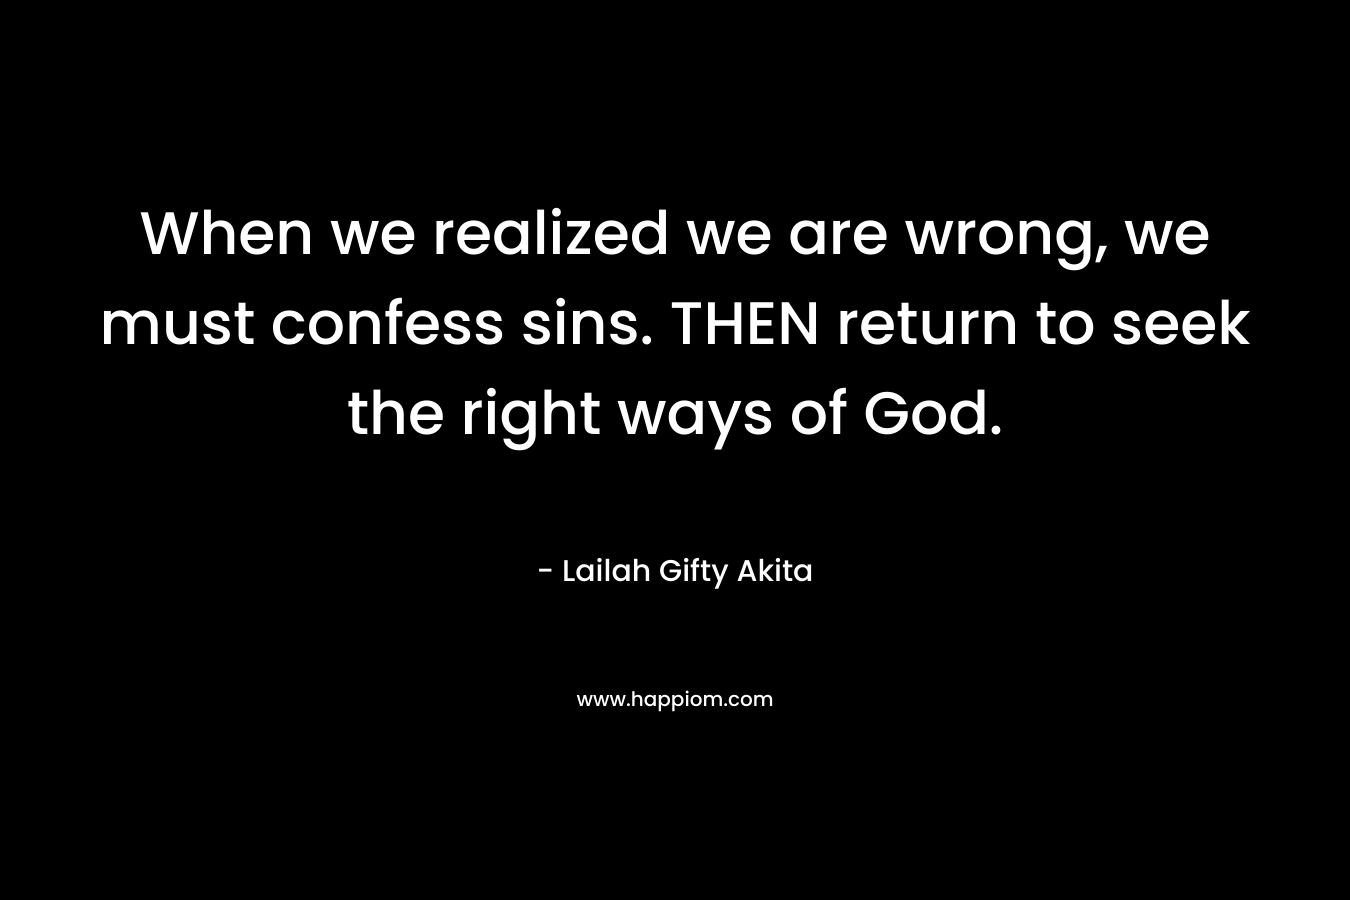 When we realized we are wrong, we must confess sins. THEN return to seek the right ways of God.